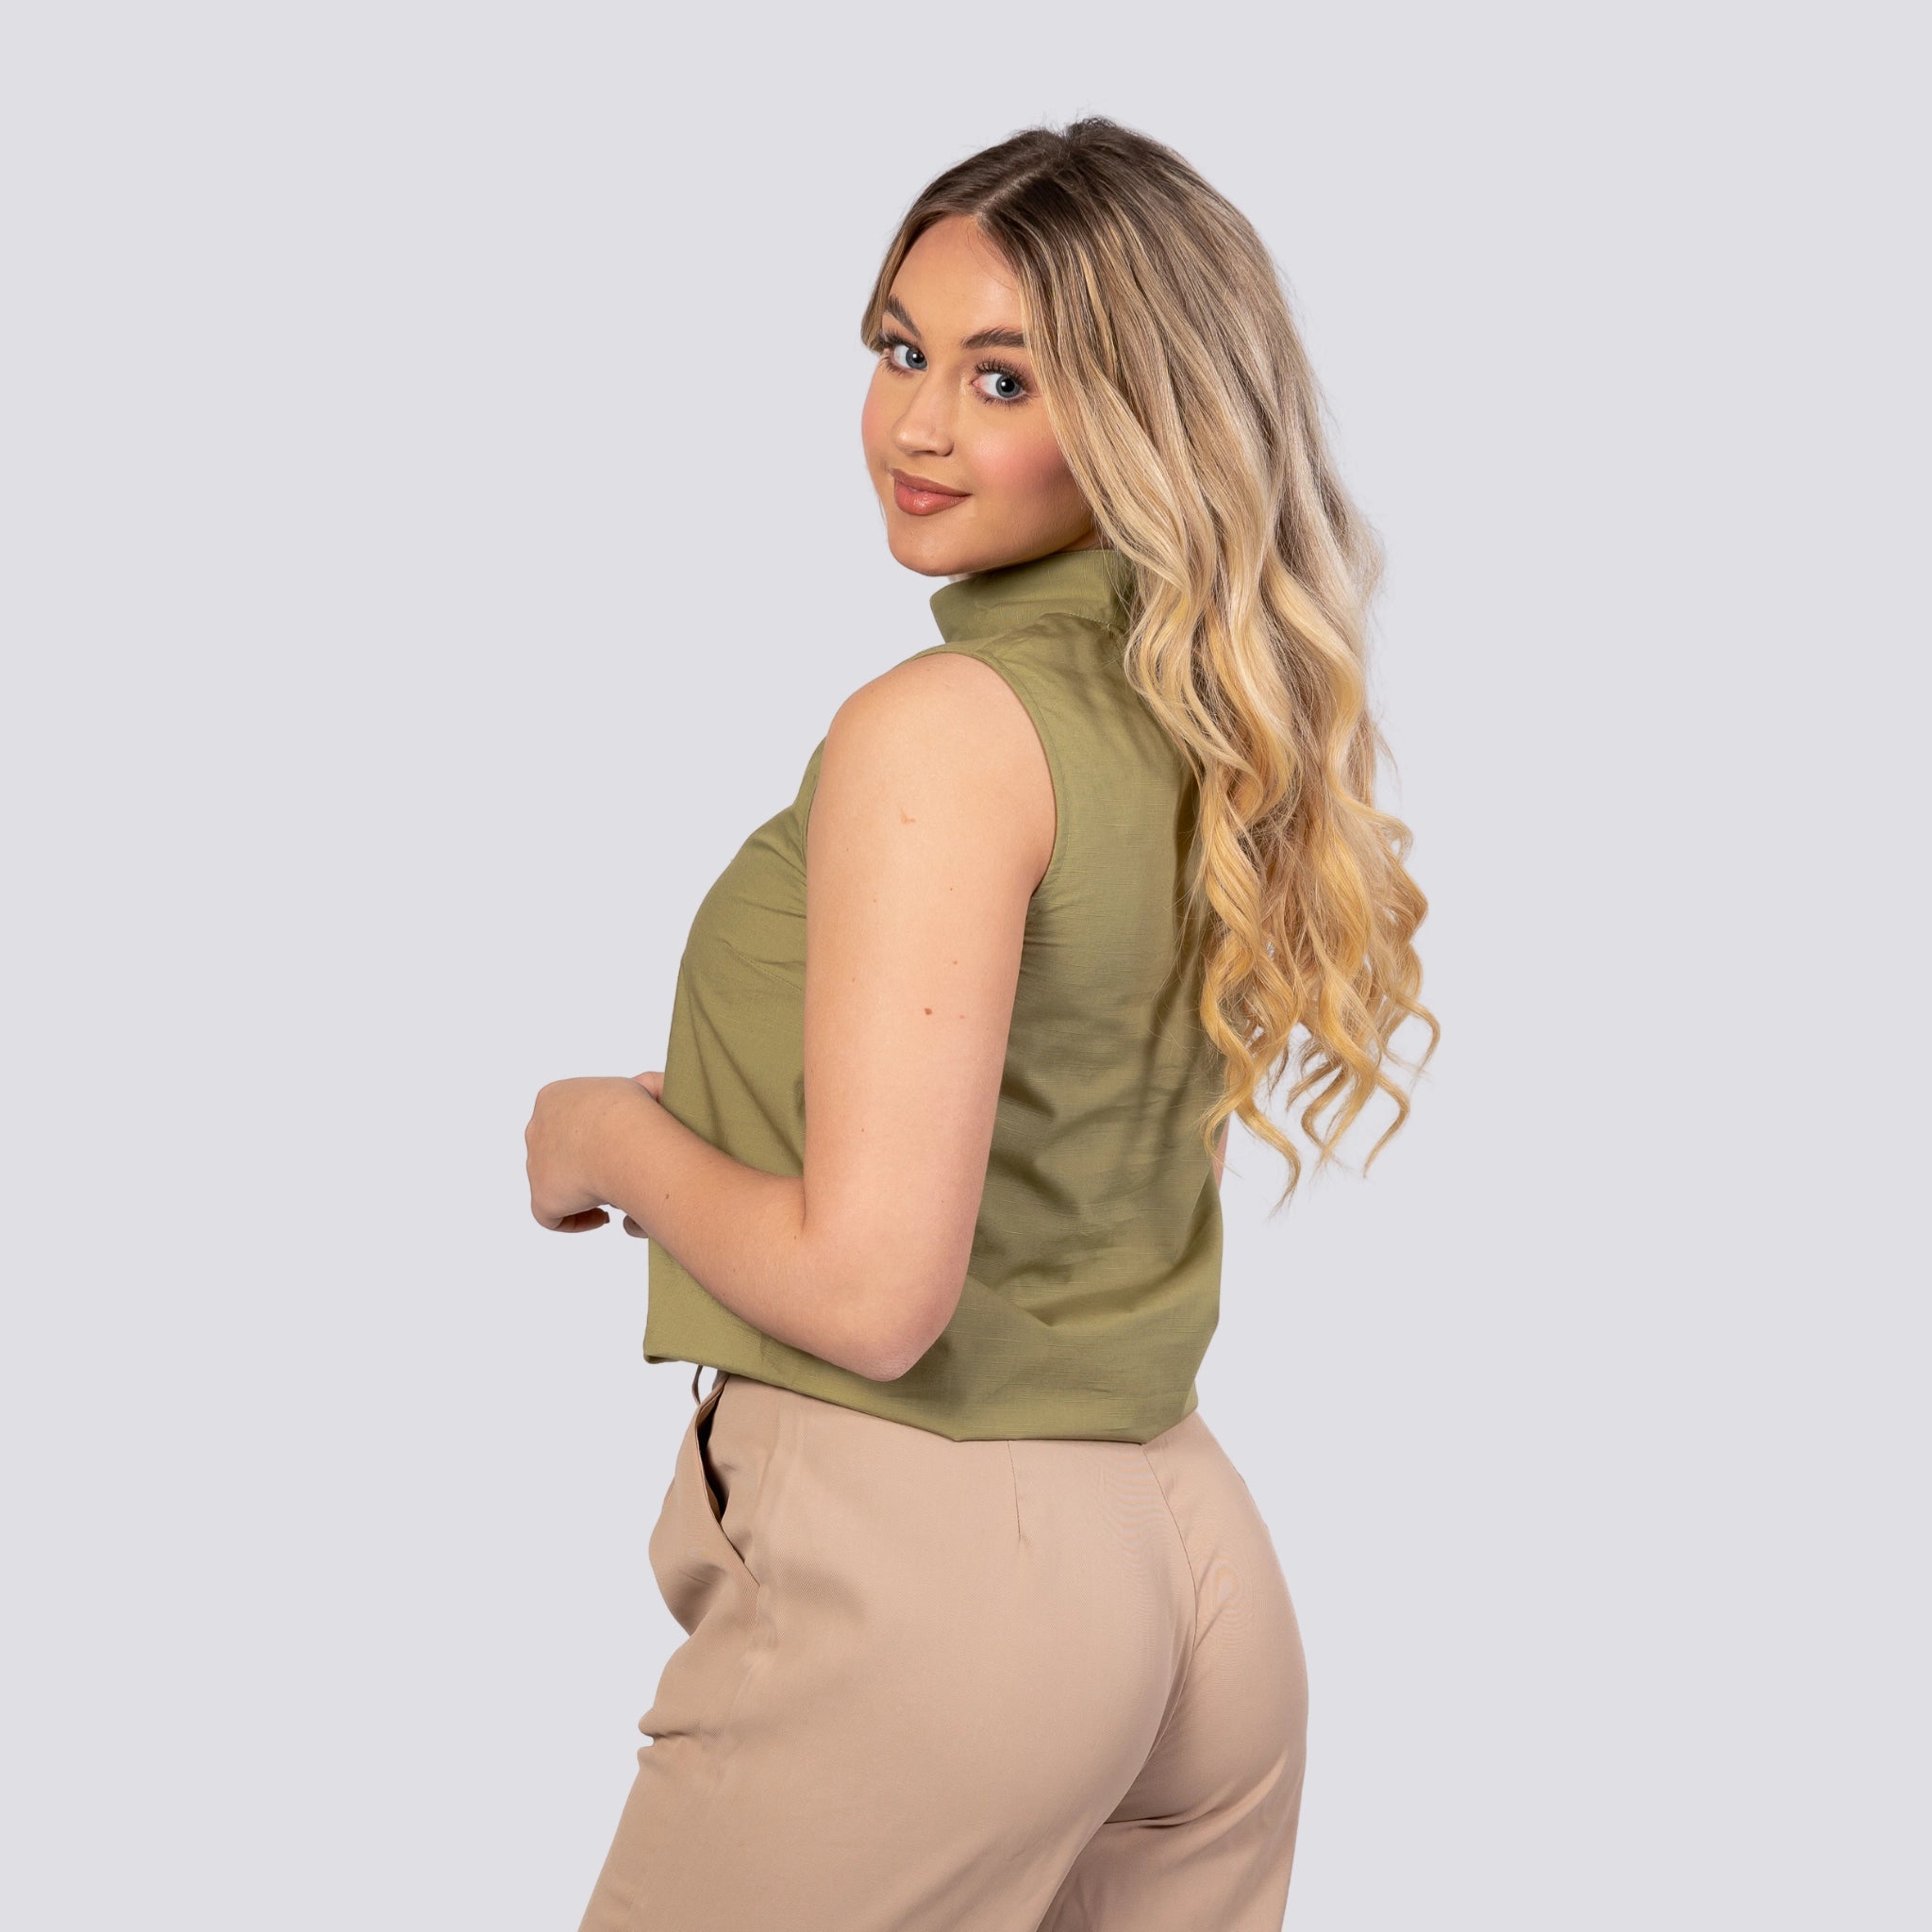 A woman with blonde hair wearing an eco-friendly Karee Pear Green Harmony Sleeveless Top and beige pants, looking over her shoulder with a slight smile, against a light gray background.